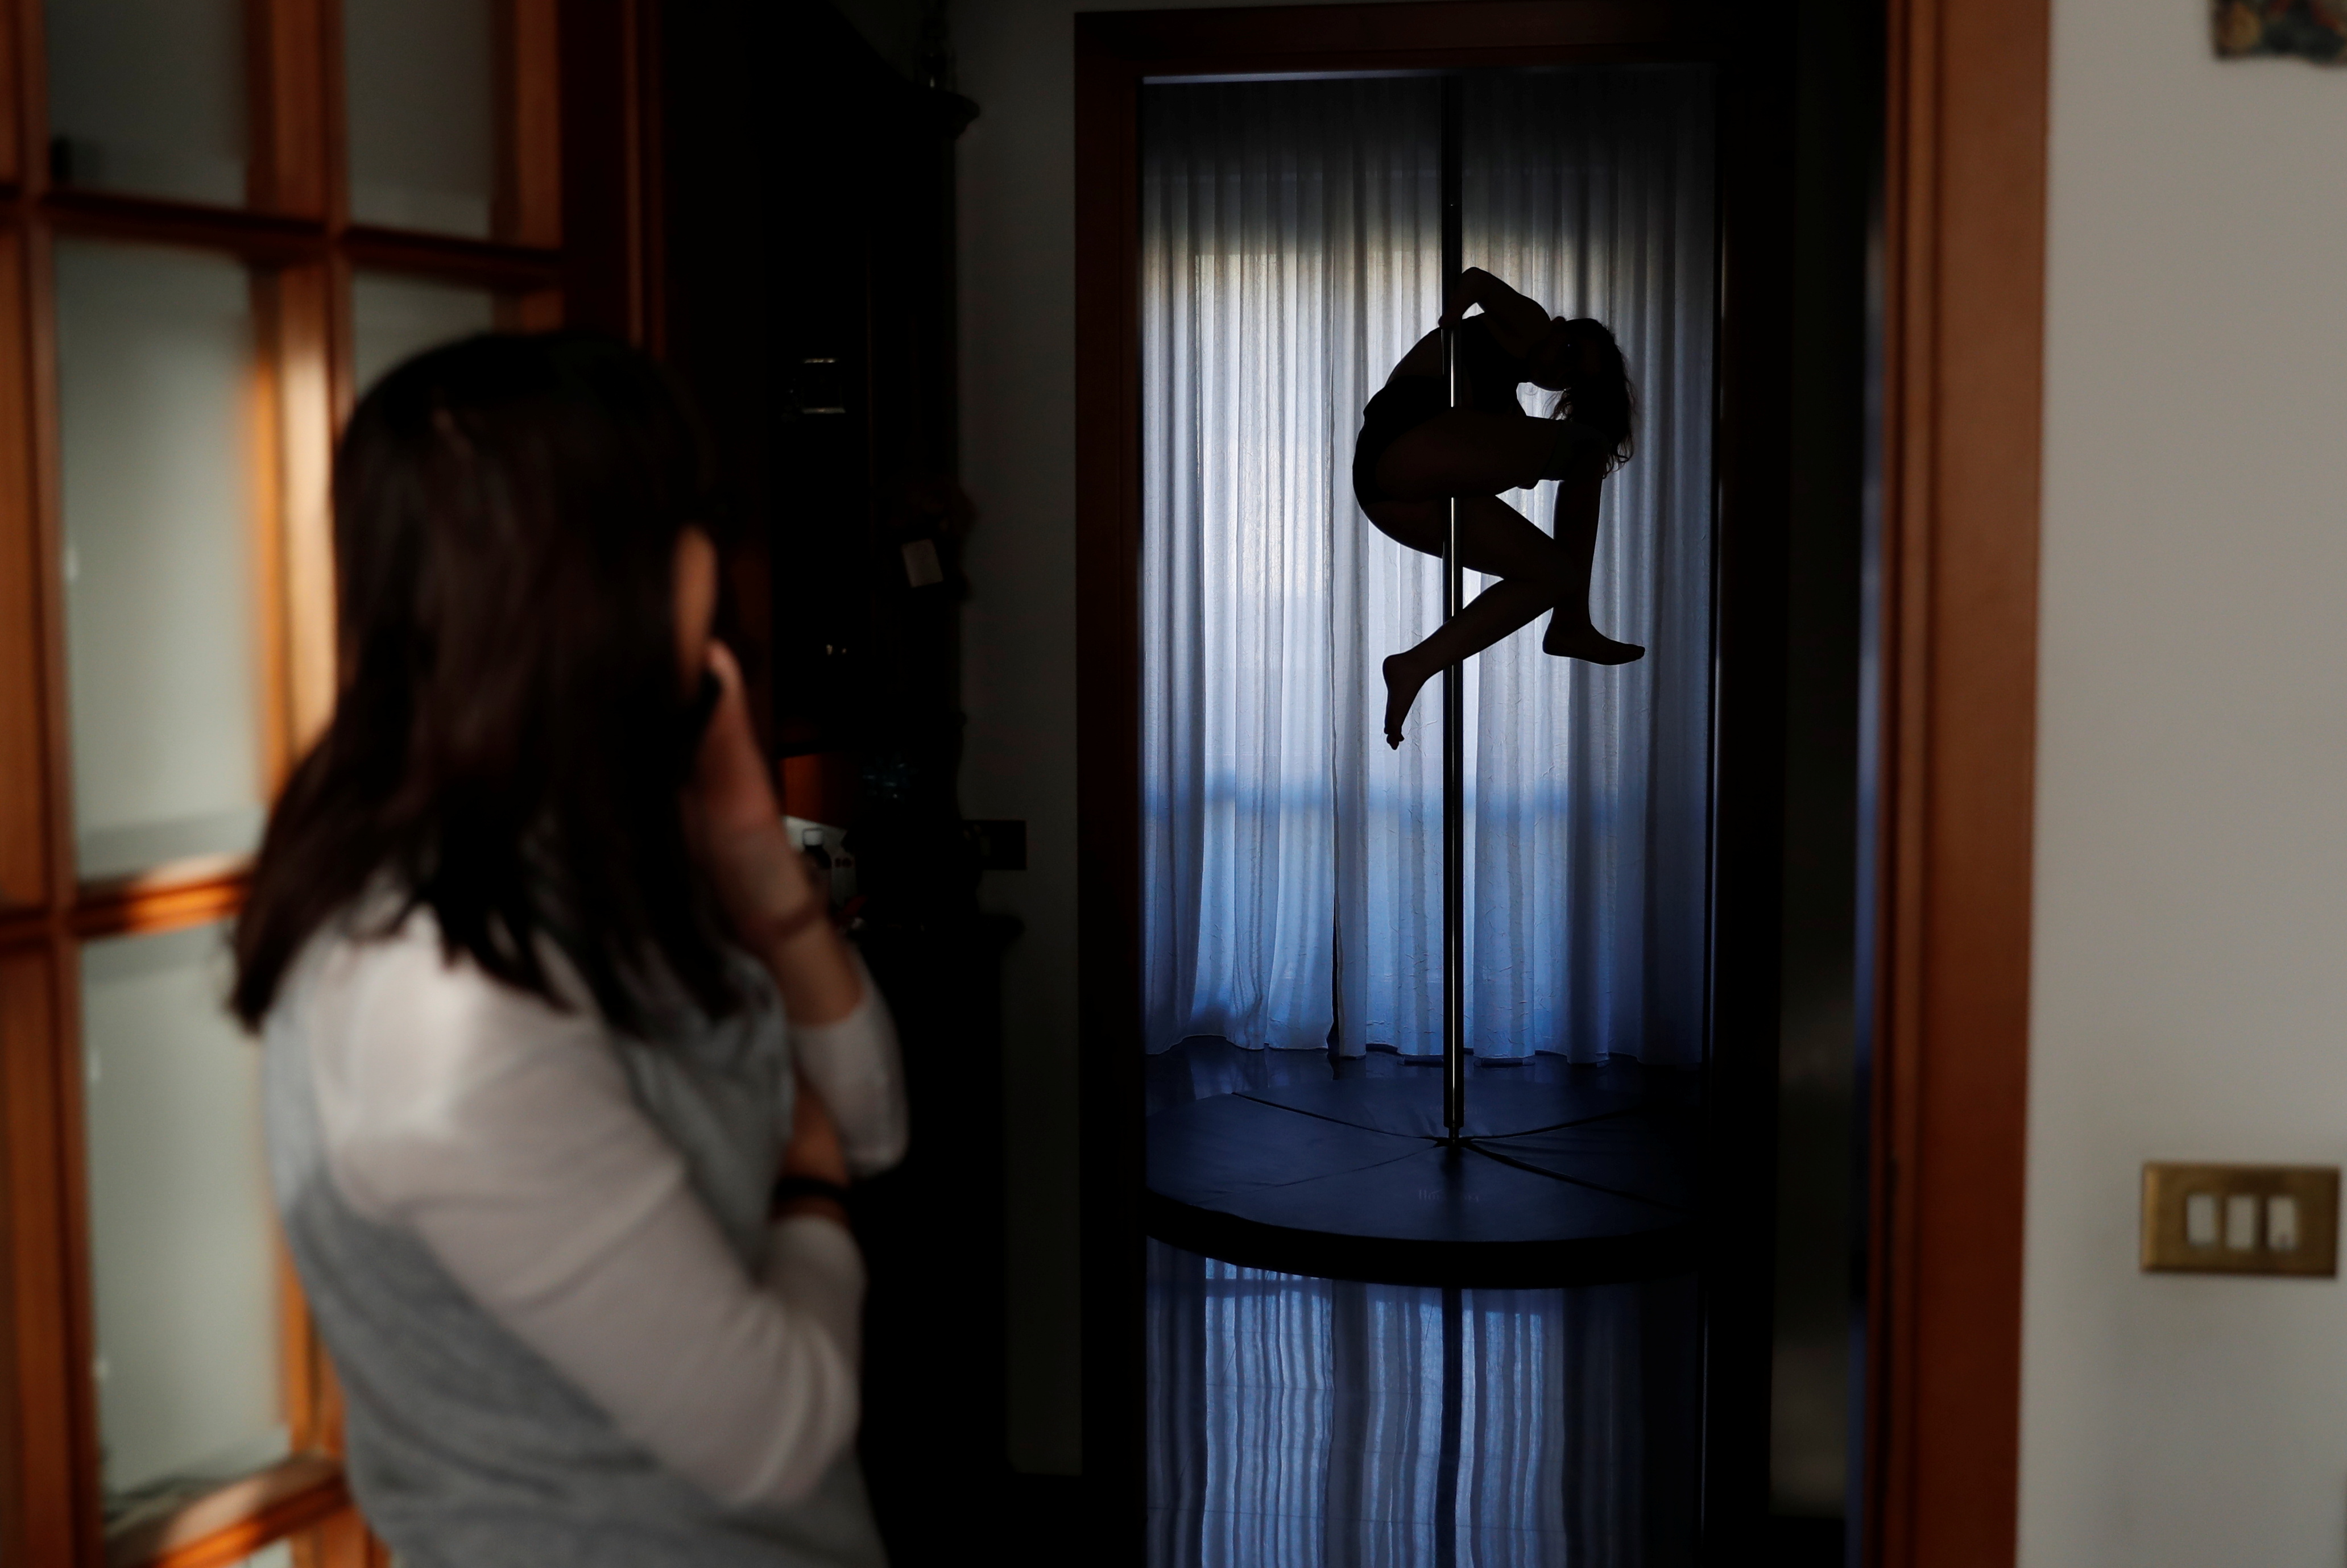 Francesca Cesarini, 15, practices pole dancing at home while her mother Valeria Mencaroni, 47, watches, in Magione, near Perugia, Italy, November 15, 2021. Cesarini was born with no hands and with only one leg so her mother was more than a bit surprised when her daughter told her she wanted to be an acrobatic pole dancer. 